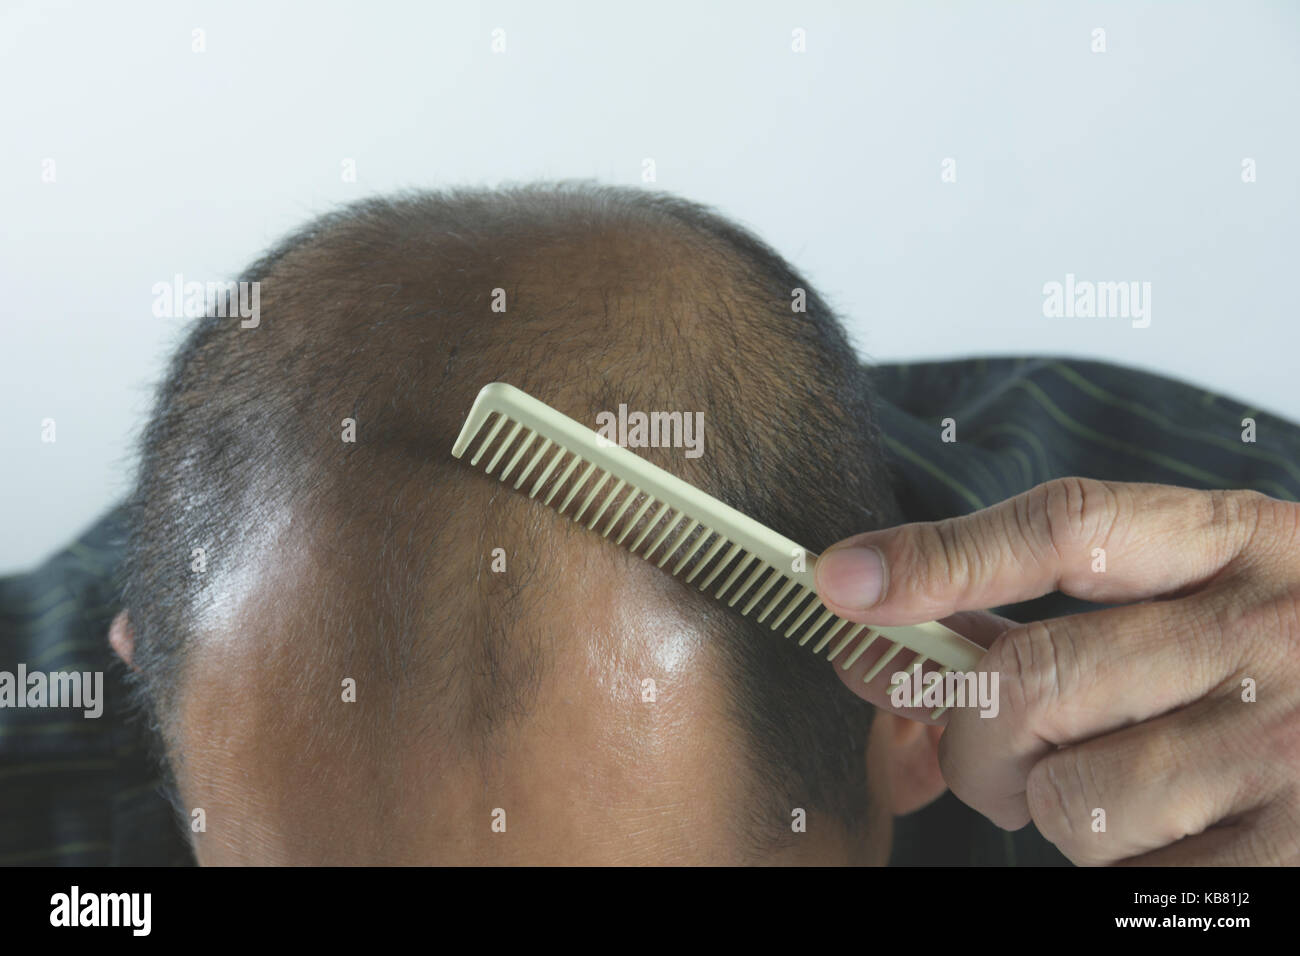 Head of man lose one's hair, glabrous on his head for elderly man Stock Photo